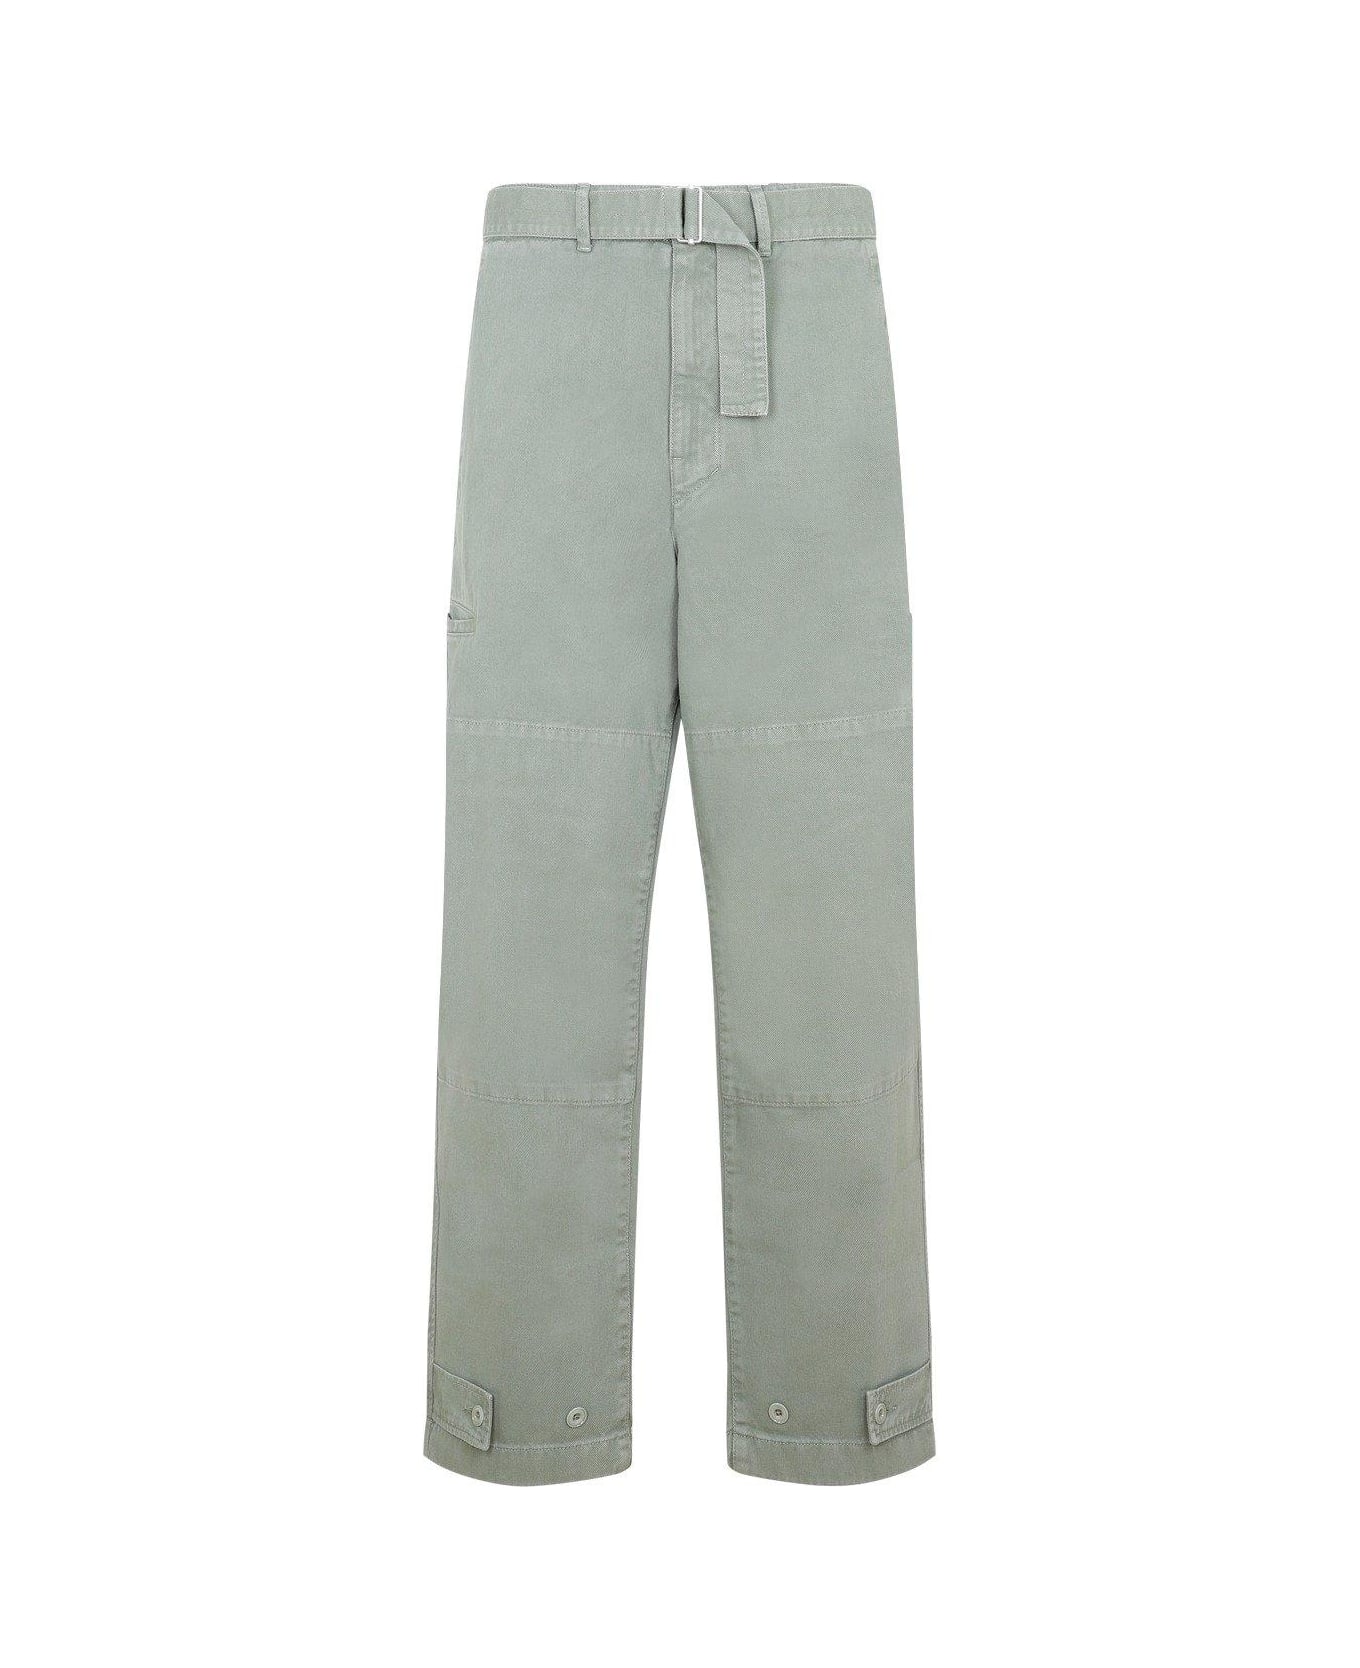 Lemaire Mllitary Pants - Hedge Green name:467